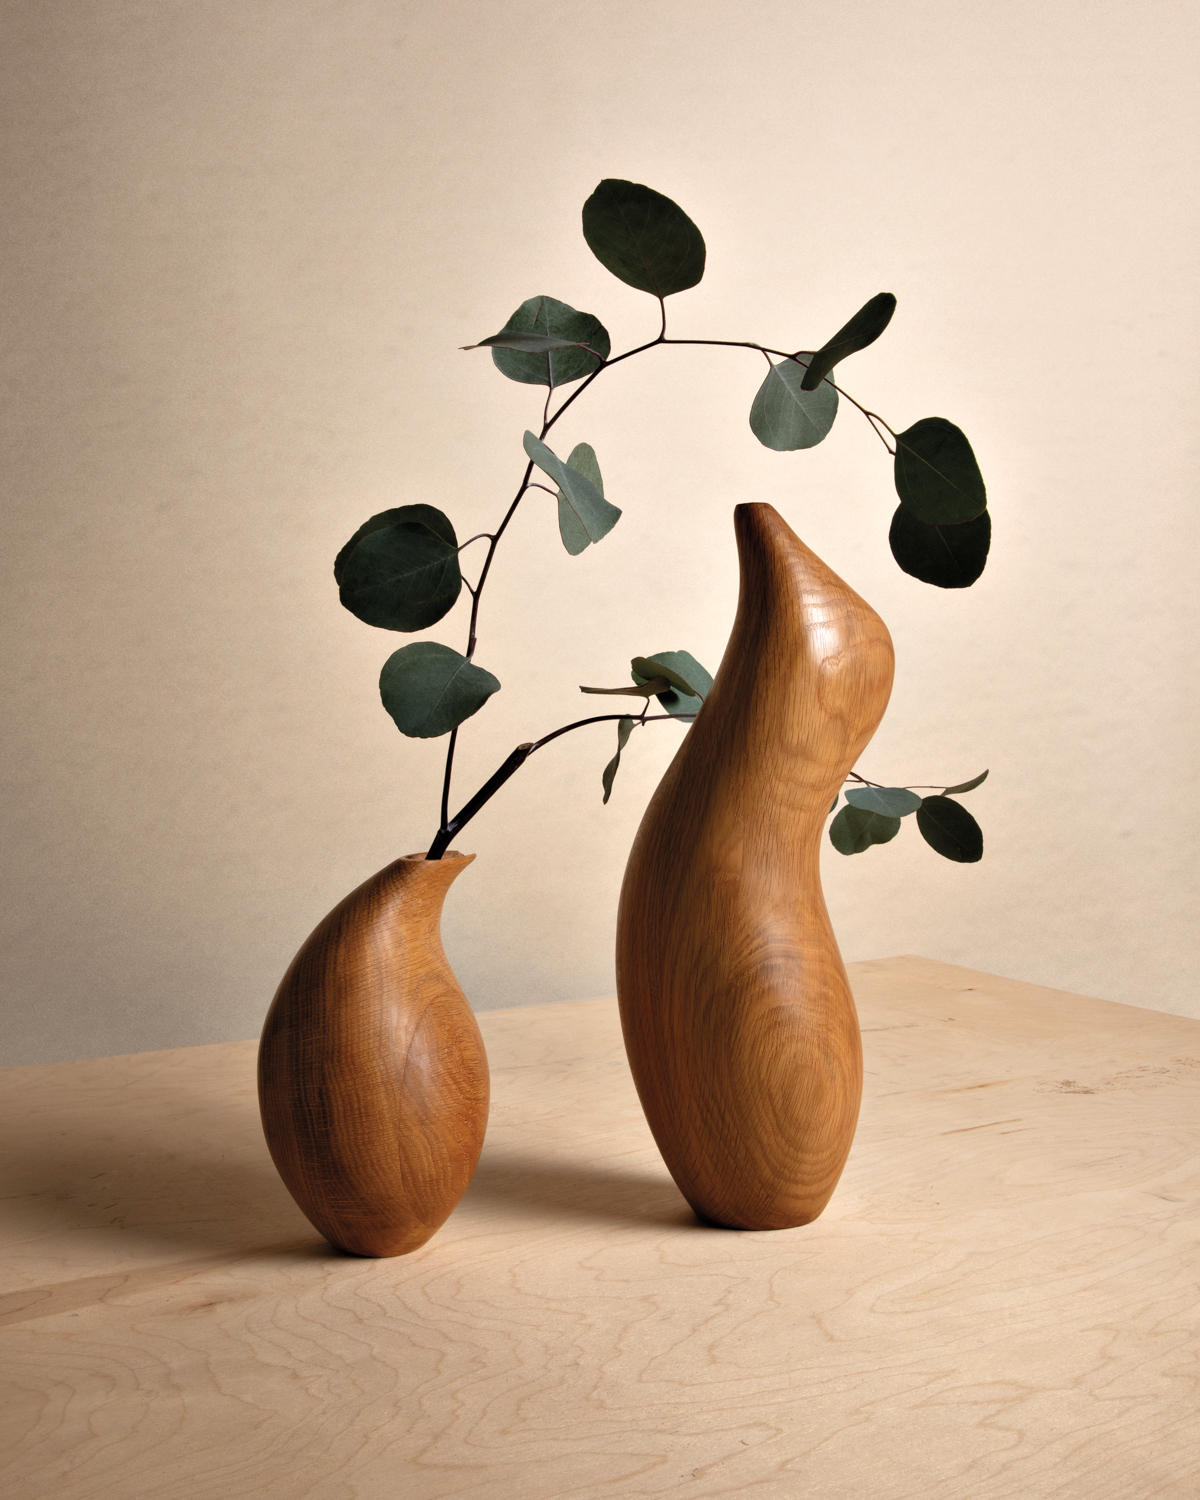 Two curvy wooden vases with plants coming out of them